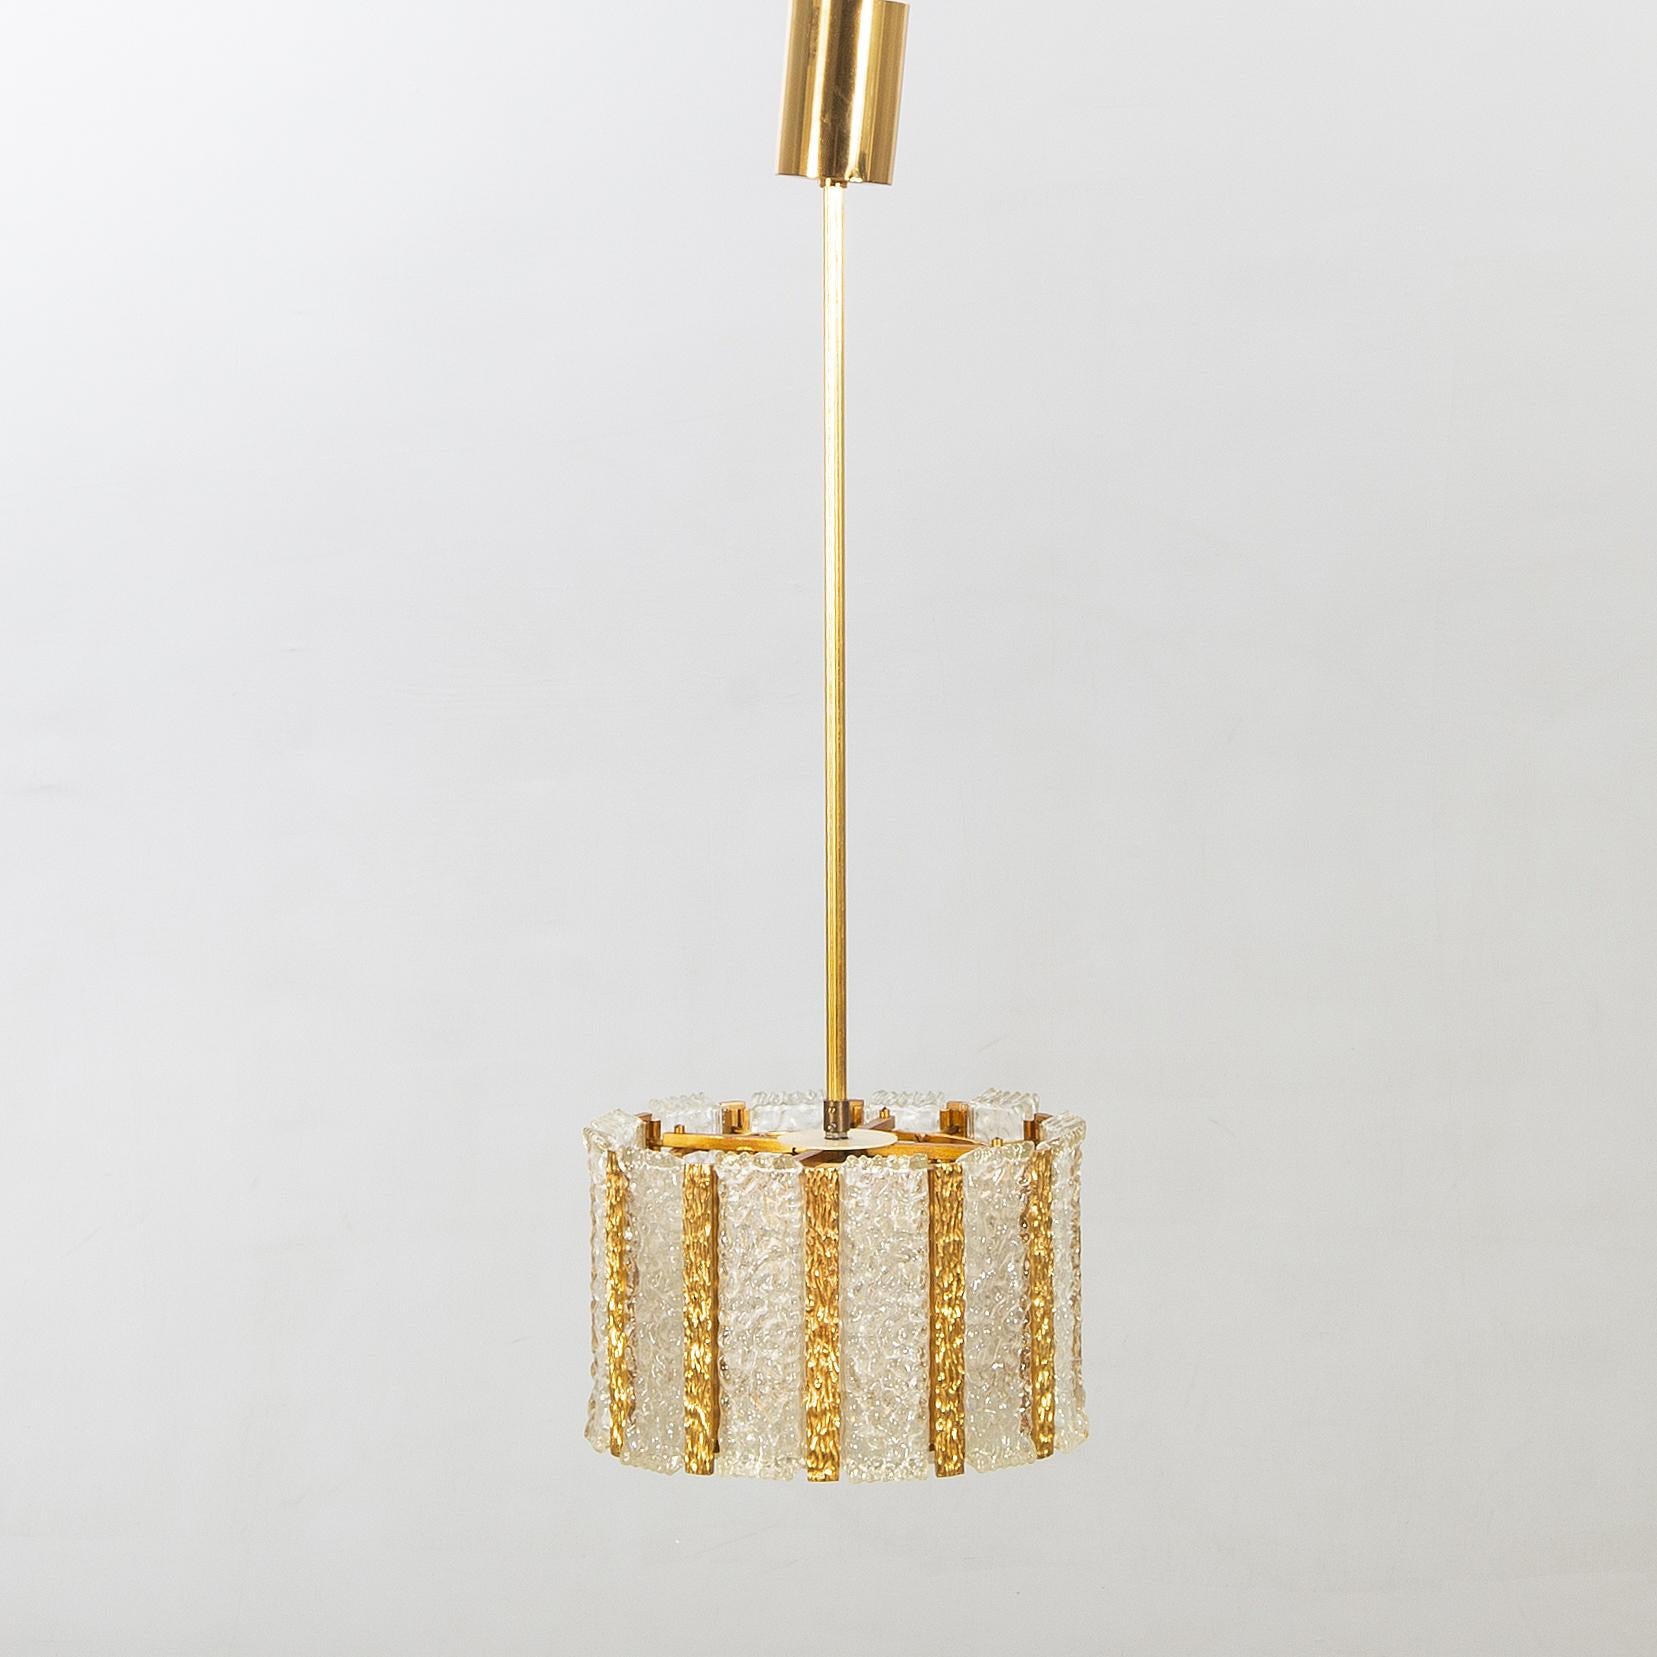 Swedish  Carl Fagerlund Ceiling Lamp for Orrefors in  Brass & Cast Glass  Sweden 1960 For Sale